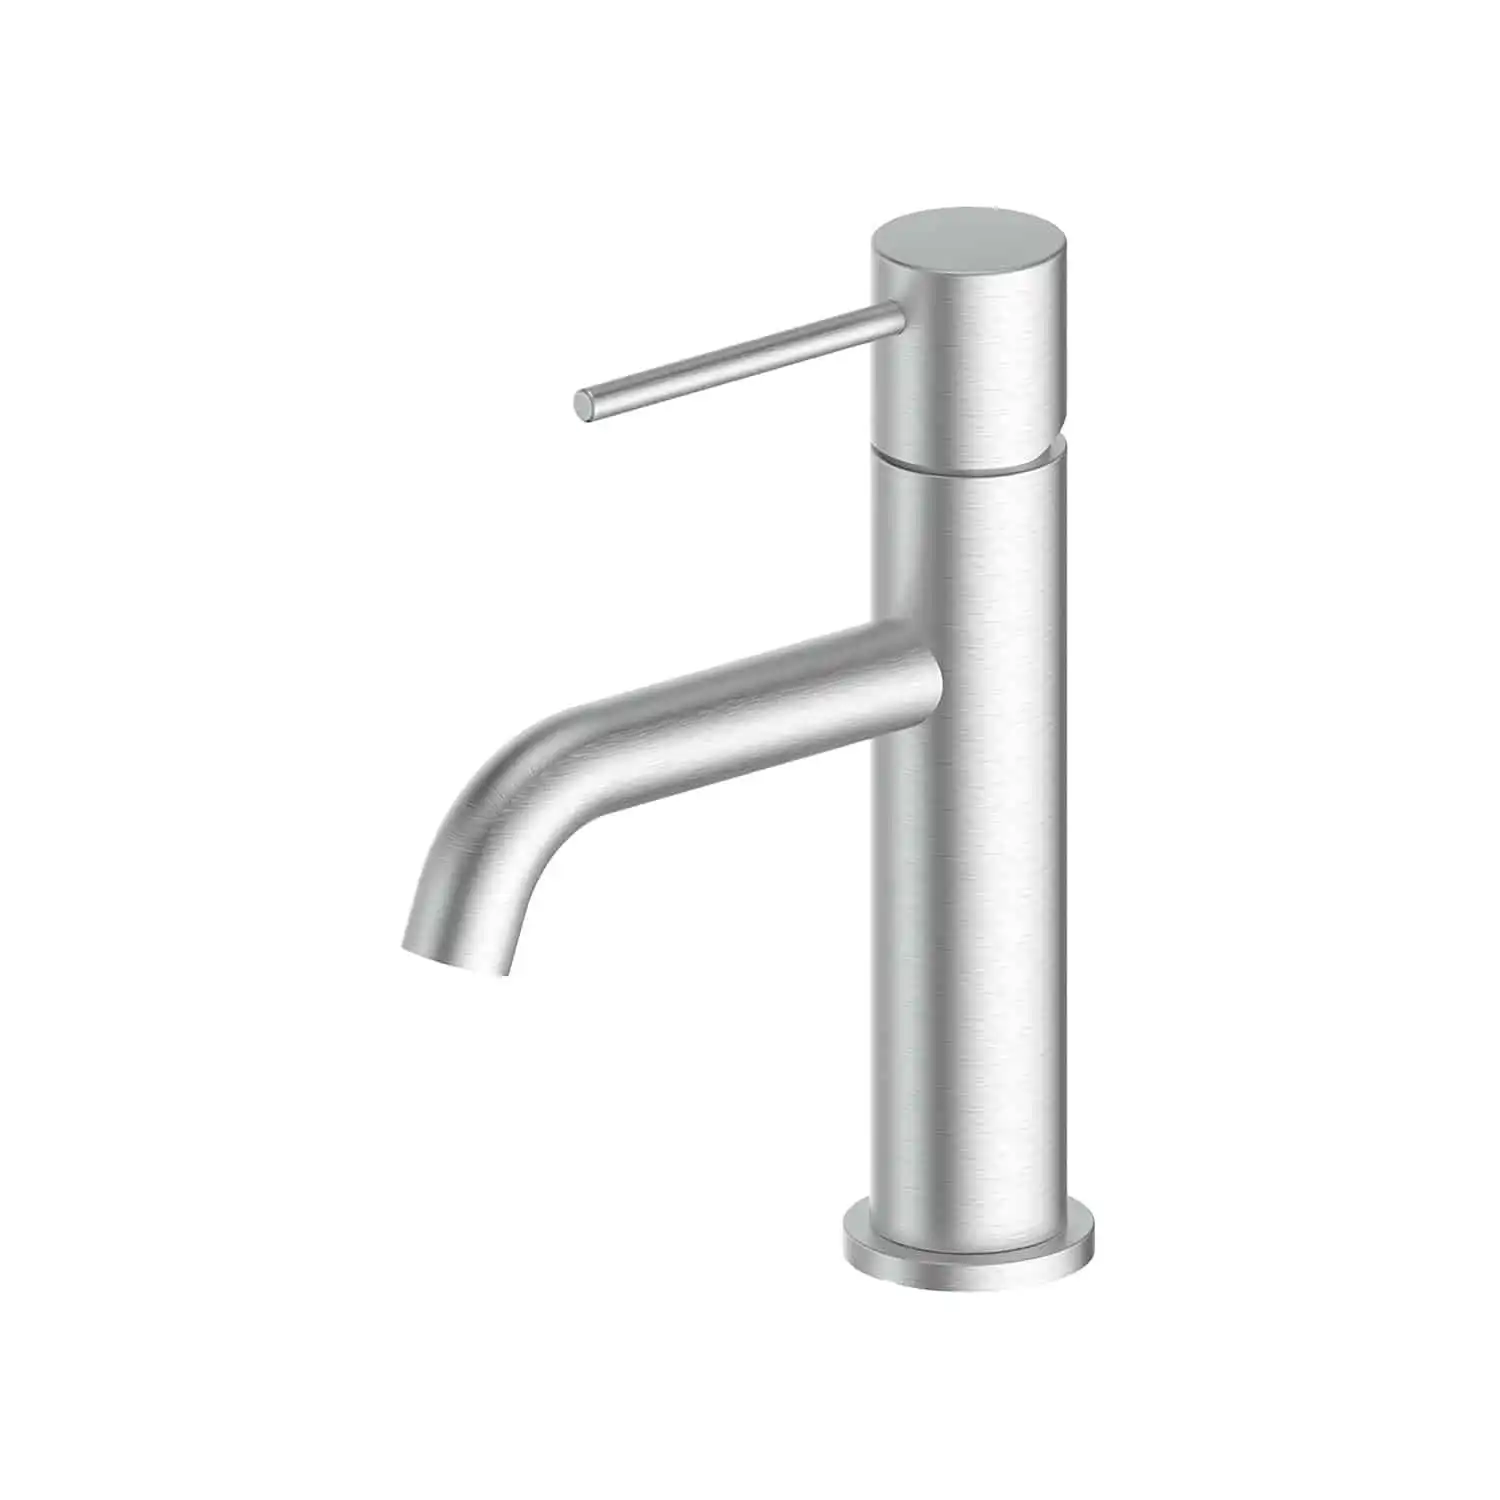 Greens Gisele Basin Mixer PVD Brushed Stainless 18402553